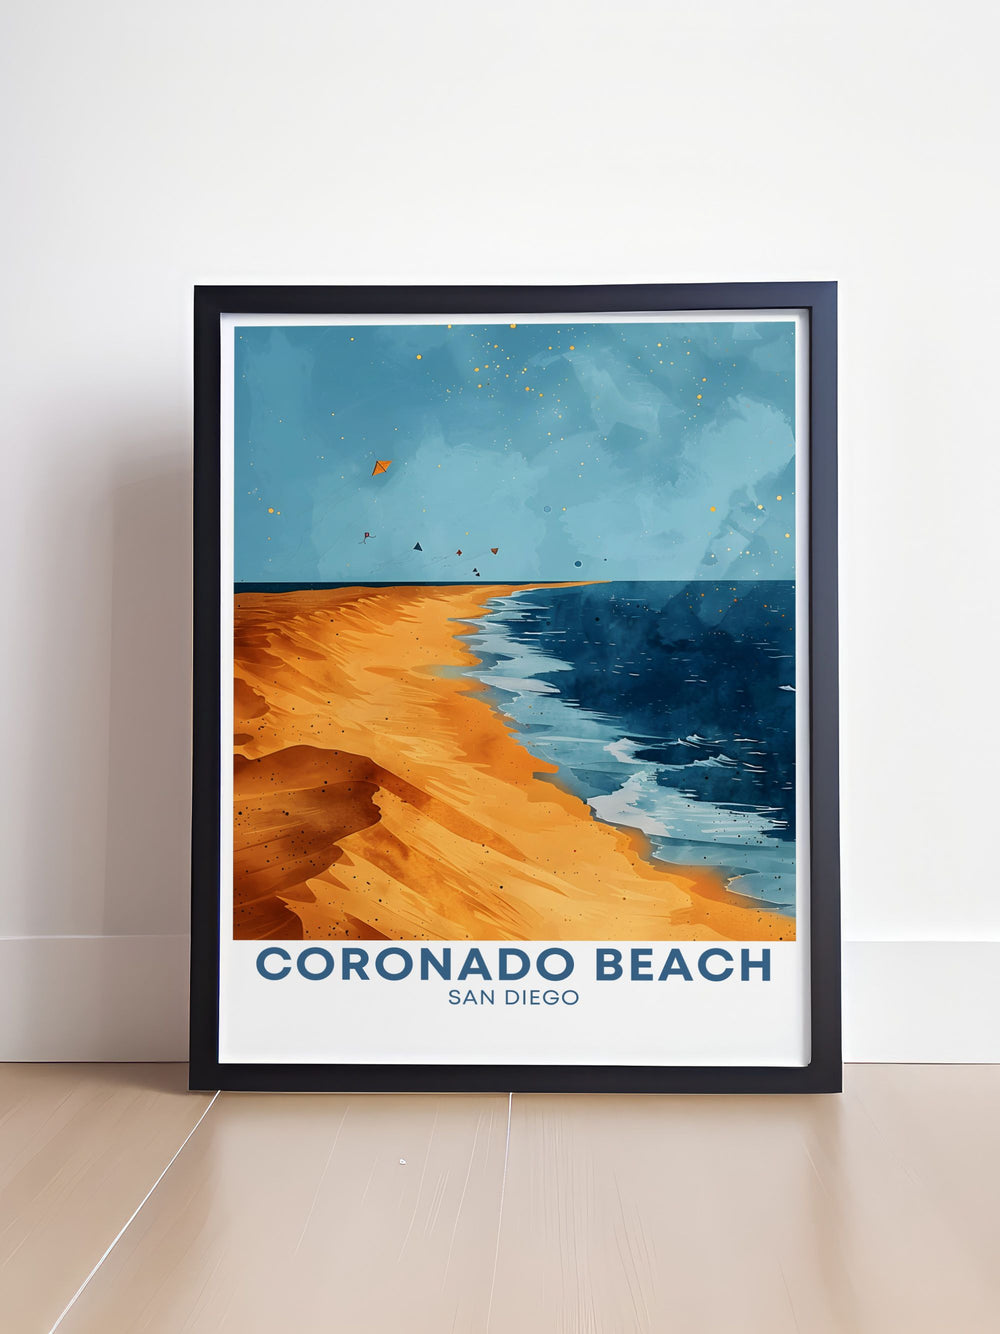 Transform your home with our Colorado Wall Art showcasing Vail Ski scenes and Sand Dunes. This Colorado print brings the majesty of the mountains and the serene beauty of the Sand Dunes into your living space with stunning clarity and color.